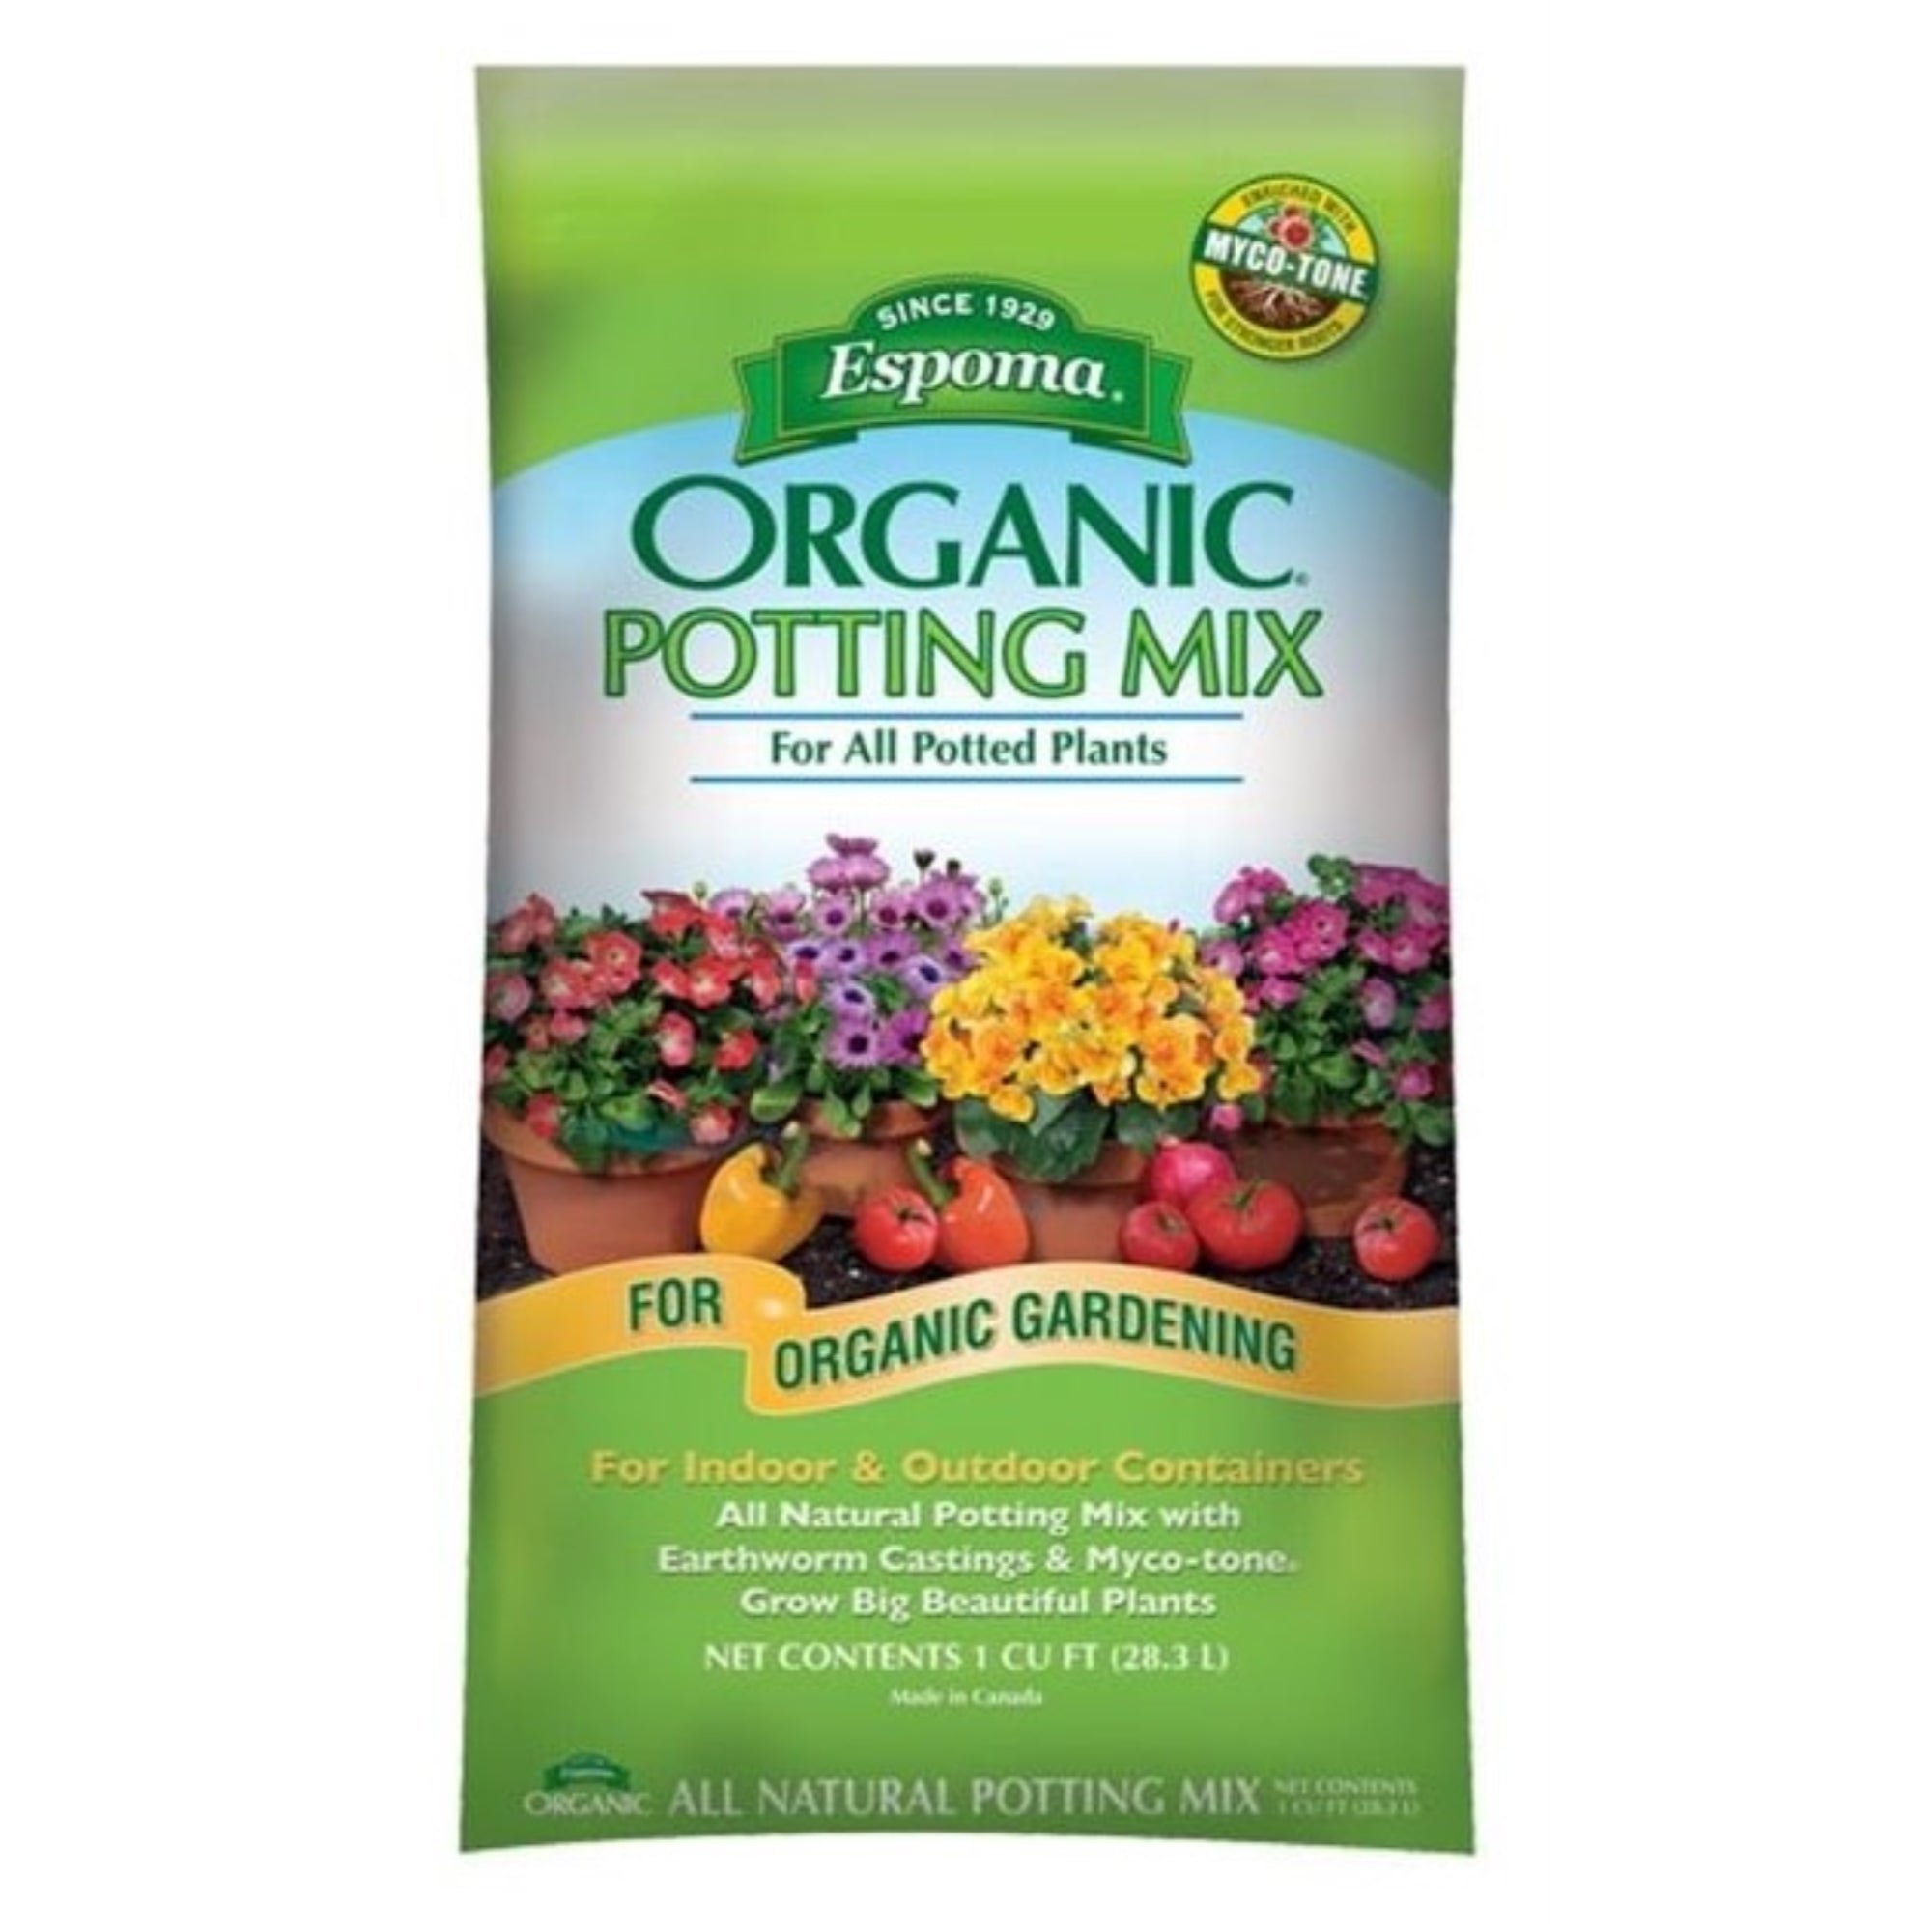 Espoma Organic Potting Soil Mix, All Natural Potting Mix For All Indoor or Outdood Potted Plants for Organic Gardening